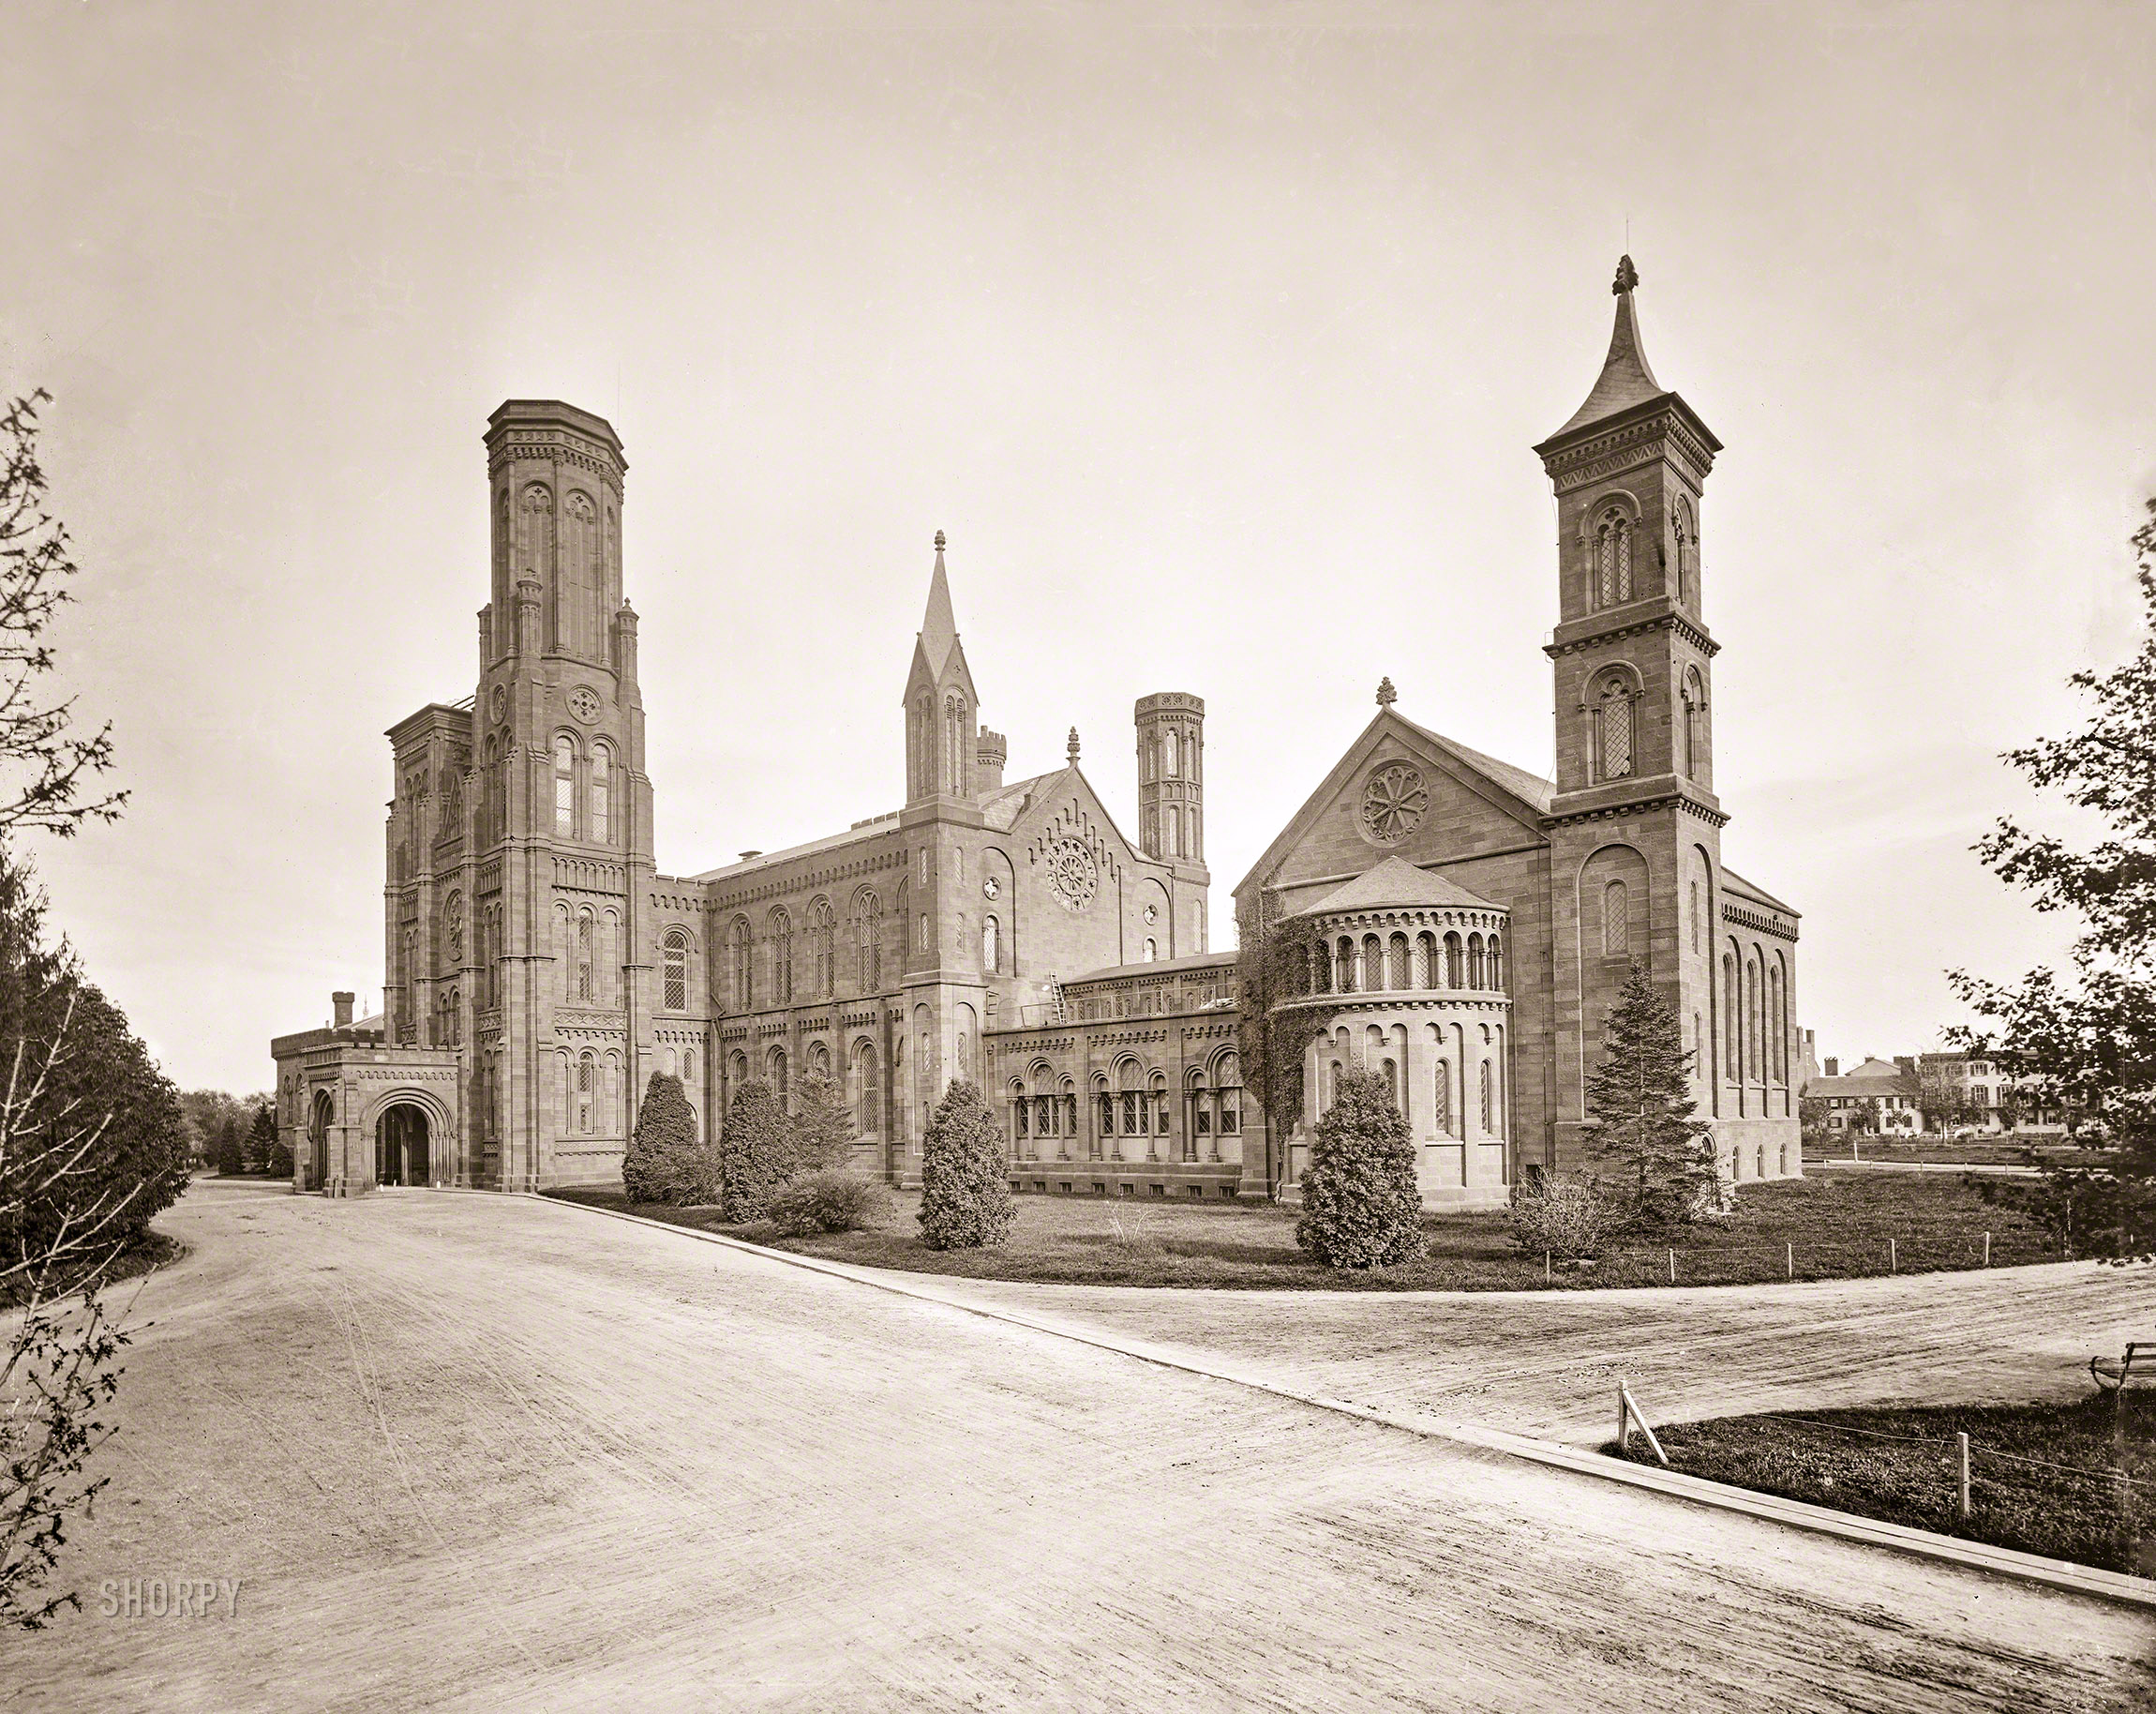 Washington, D.C. "Smithsonian Institute, 1860-1865." Wet collodion glass plate, Brady-Handy Collection. View full size.